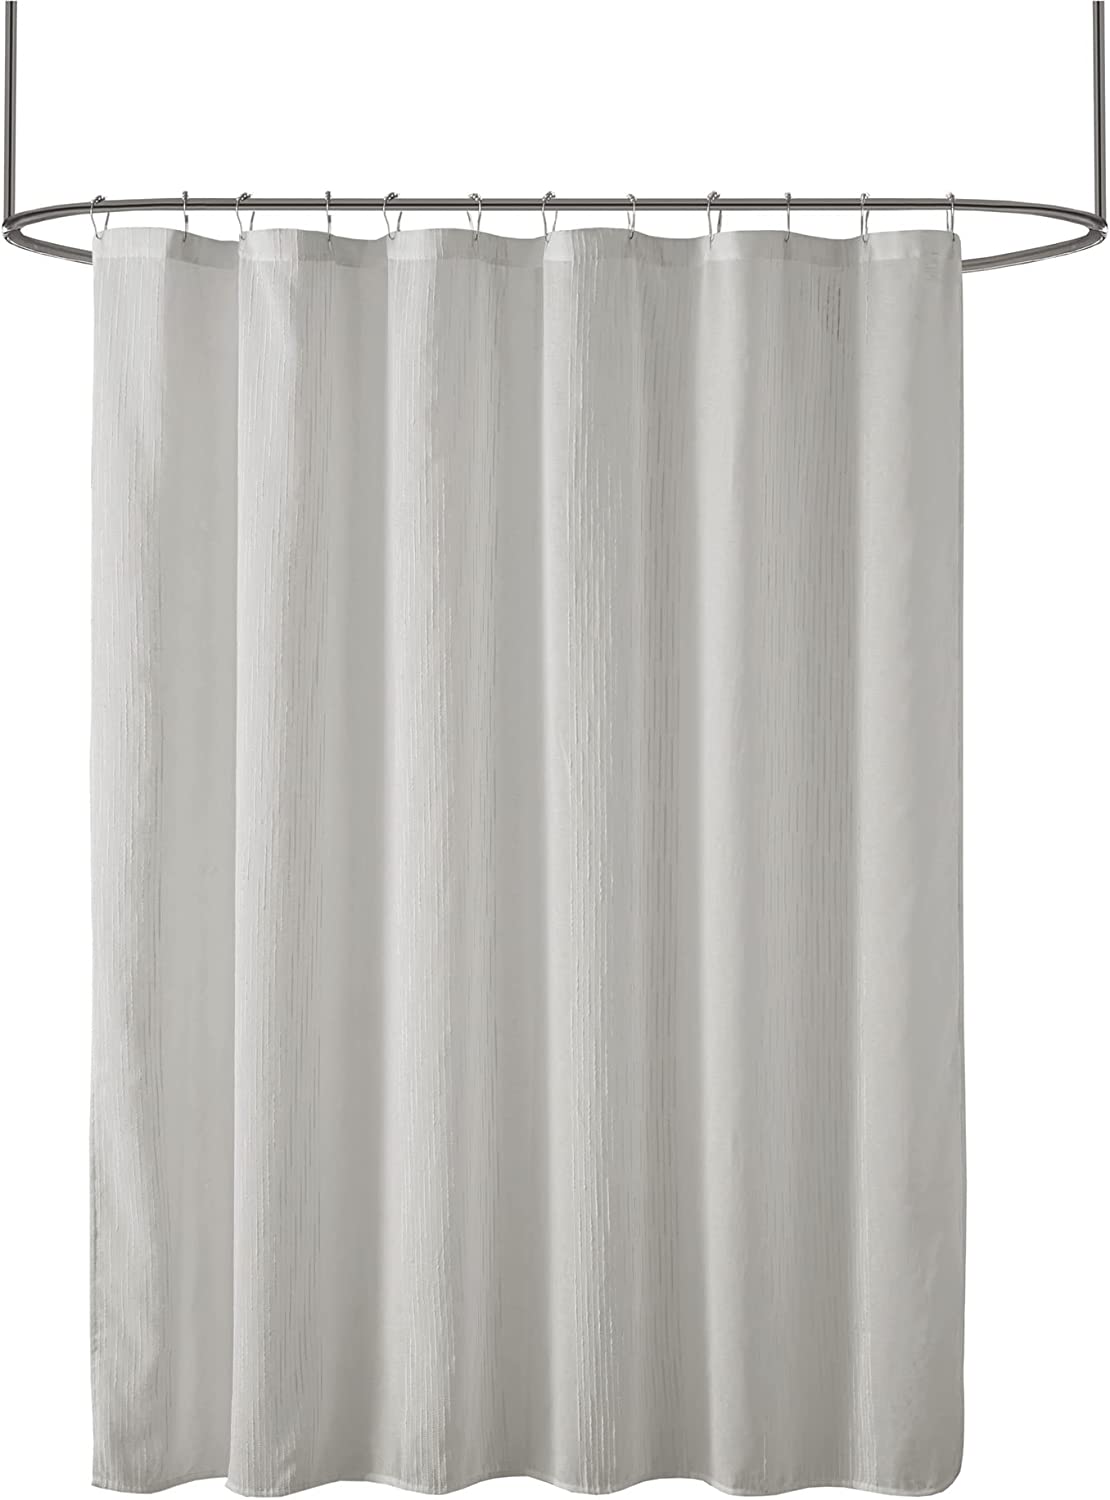 Madison Park Anna Sheers Shower Curtain, Textured Striped Accent Design, Modern Mid-Century Bathroom Decor, Machine Washable, Fabric Privacy Screen 72x72&#34;, Ivory